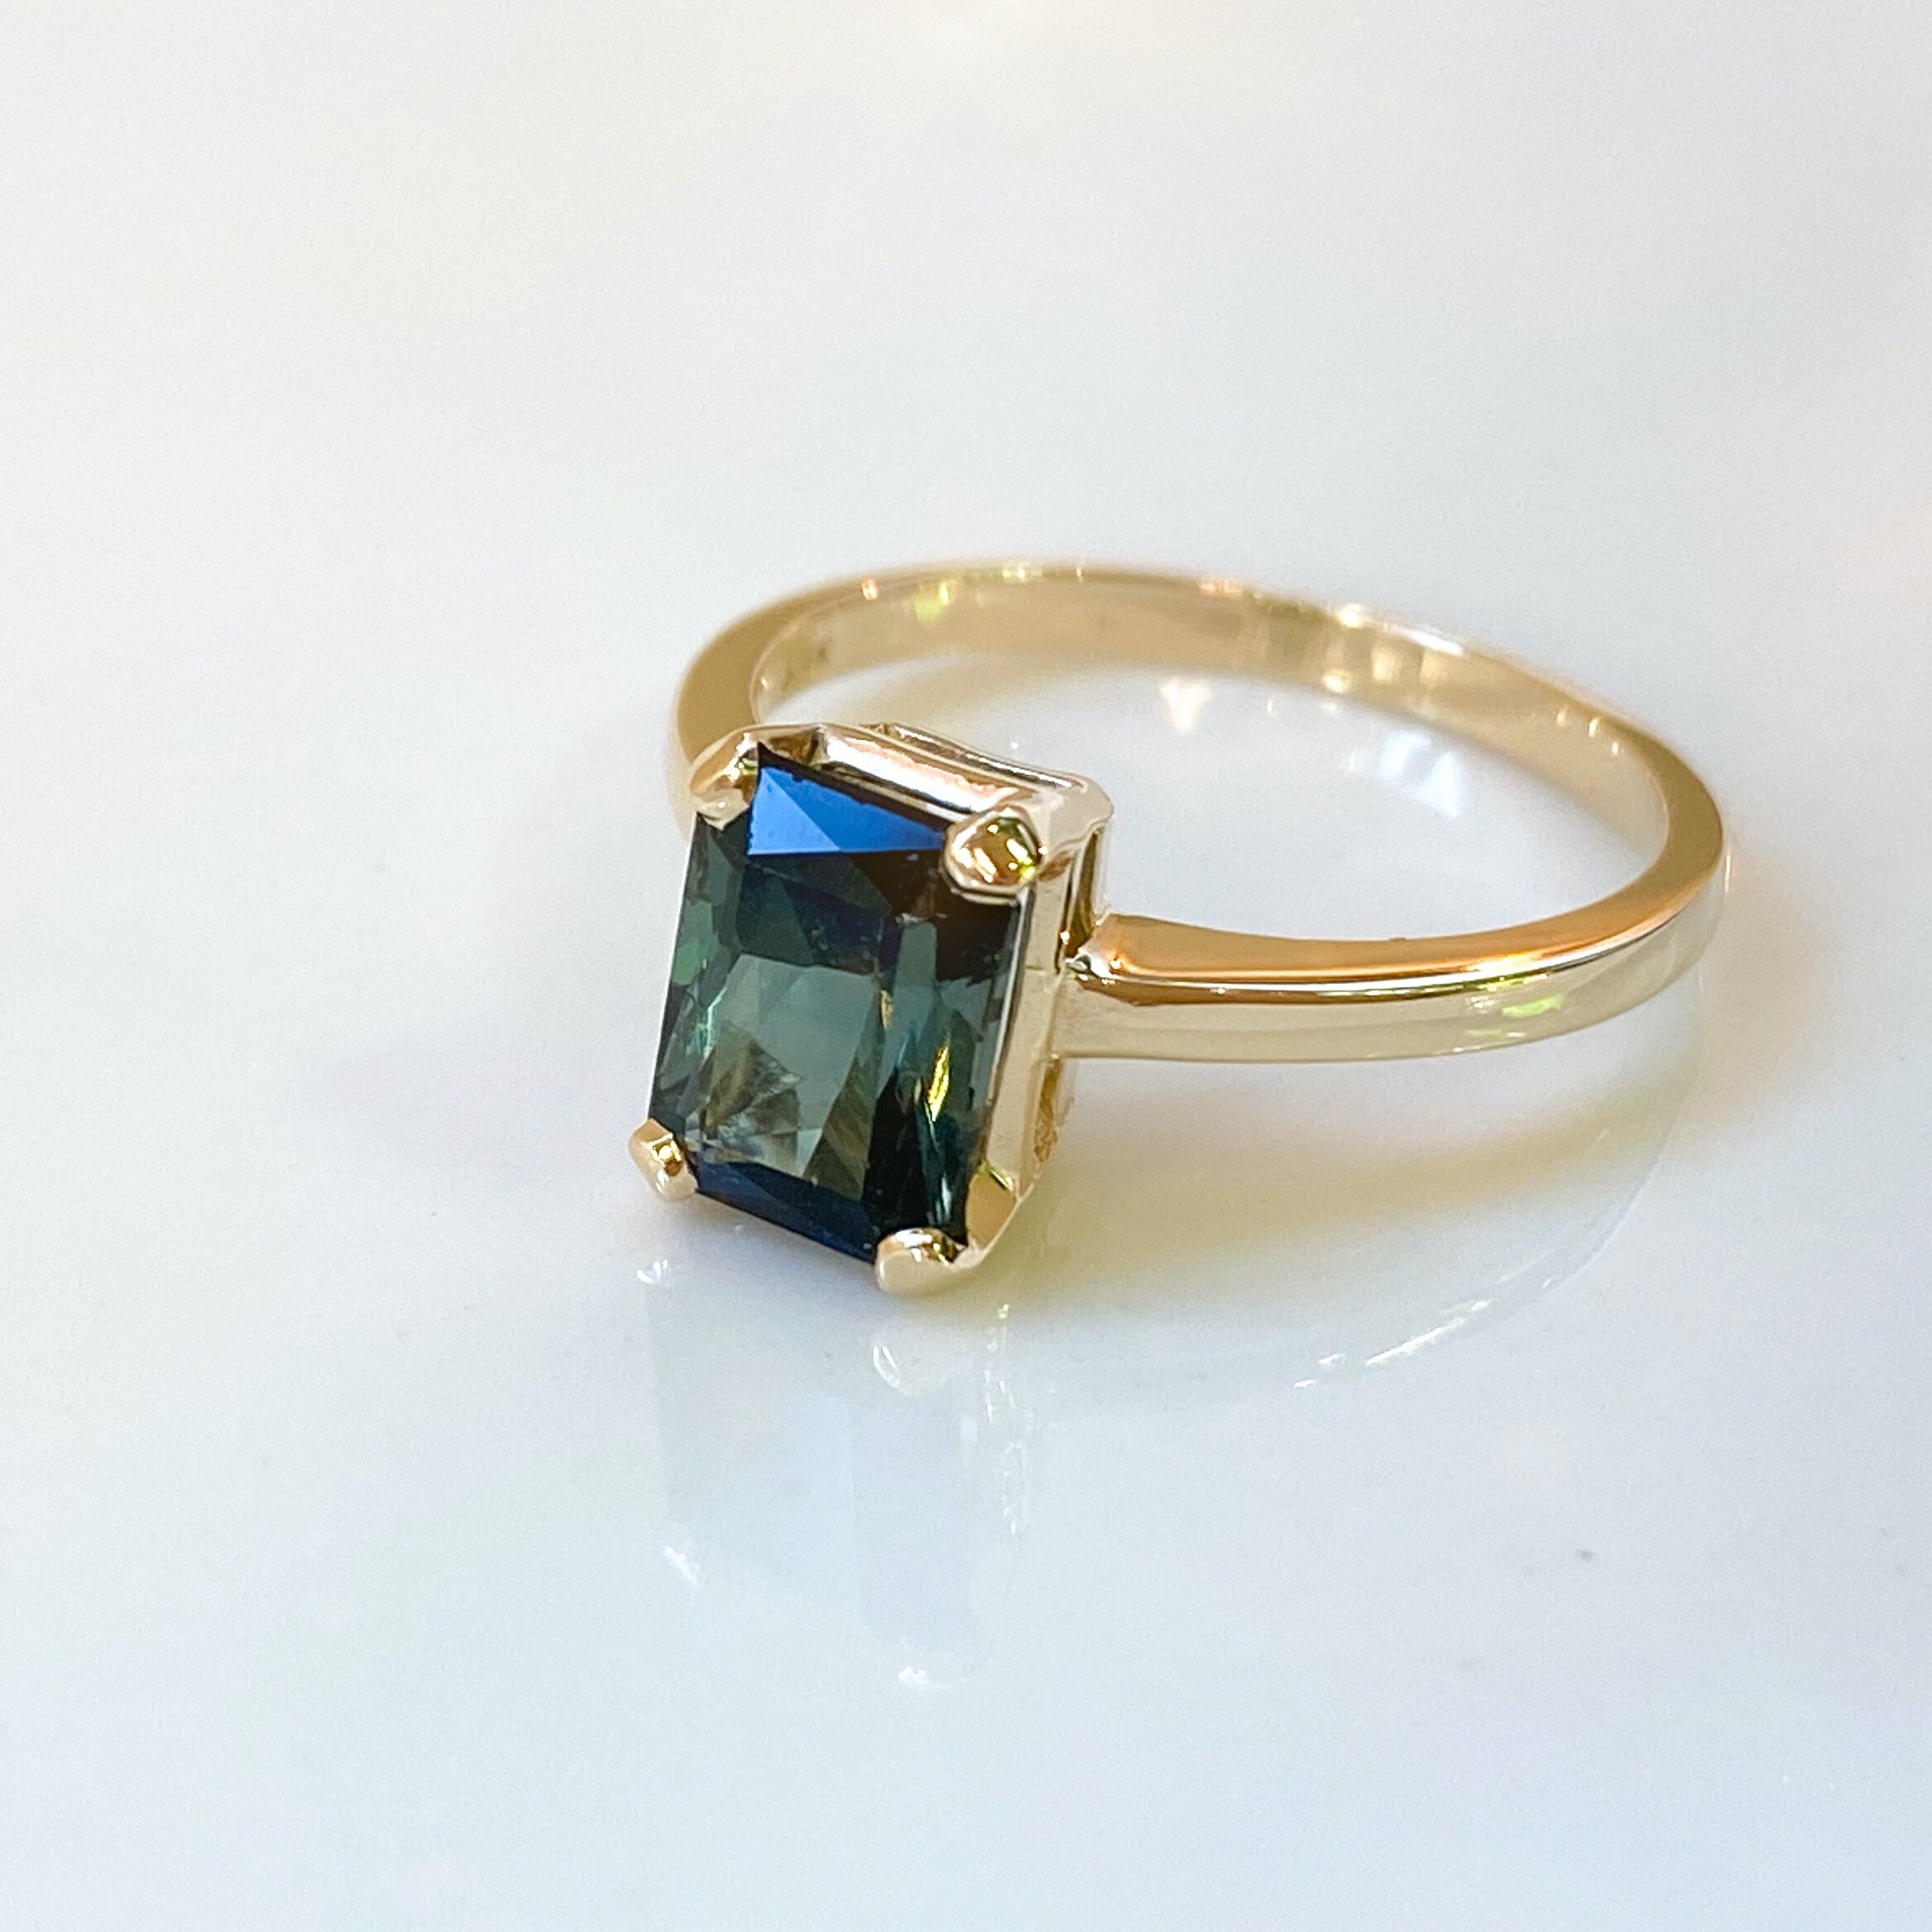 14k yellow gold ring with green tourmaline